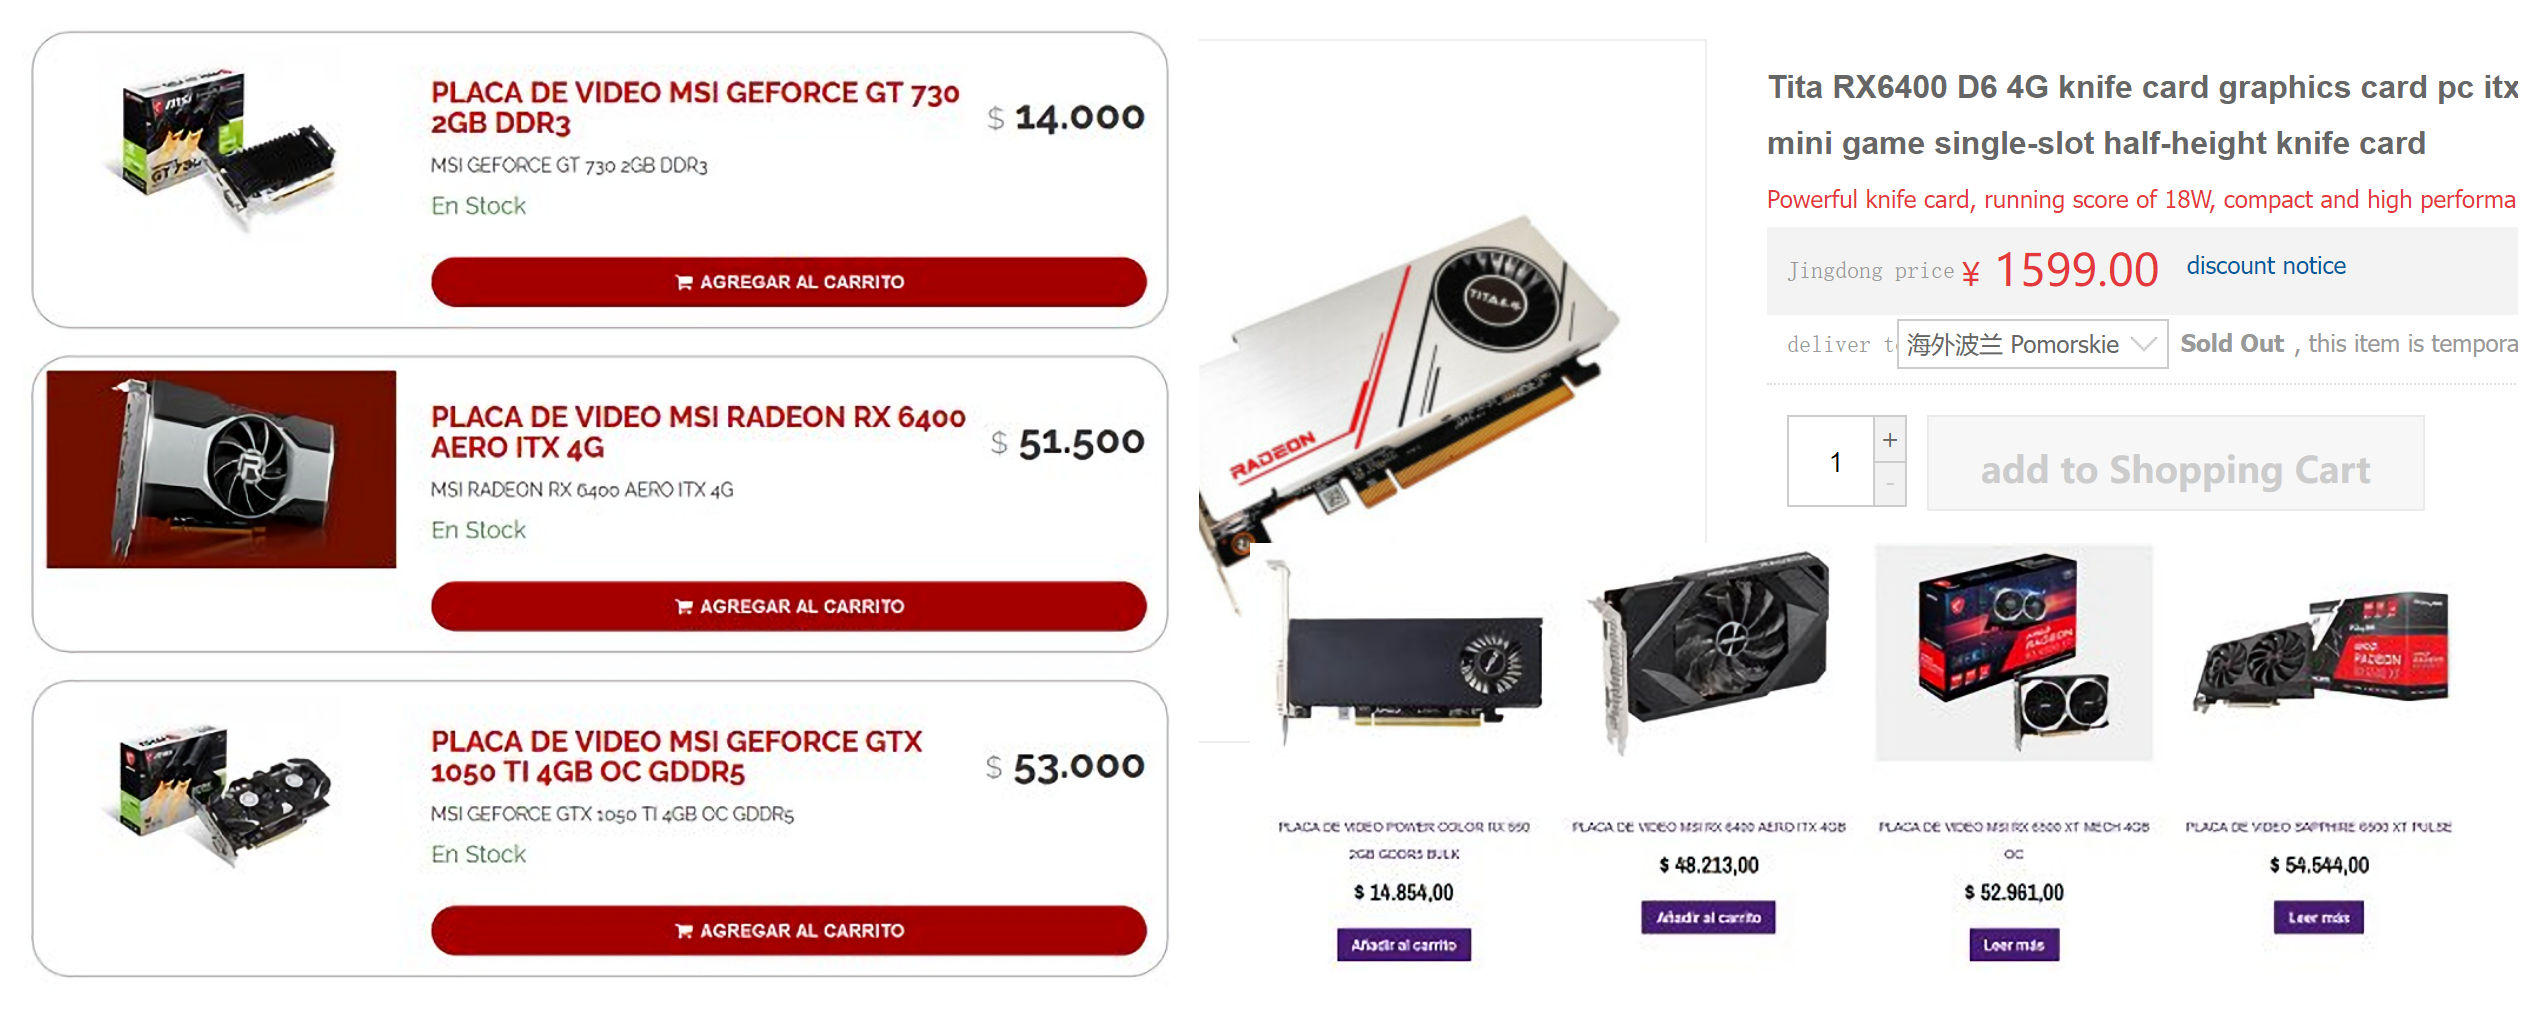 GeForce GT 720 v2 MSI 2GB Edition Can Run PC Game System Requirements